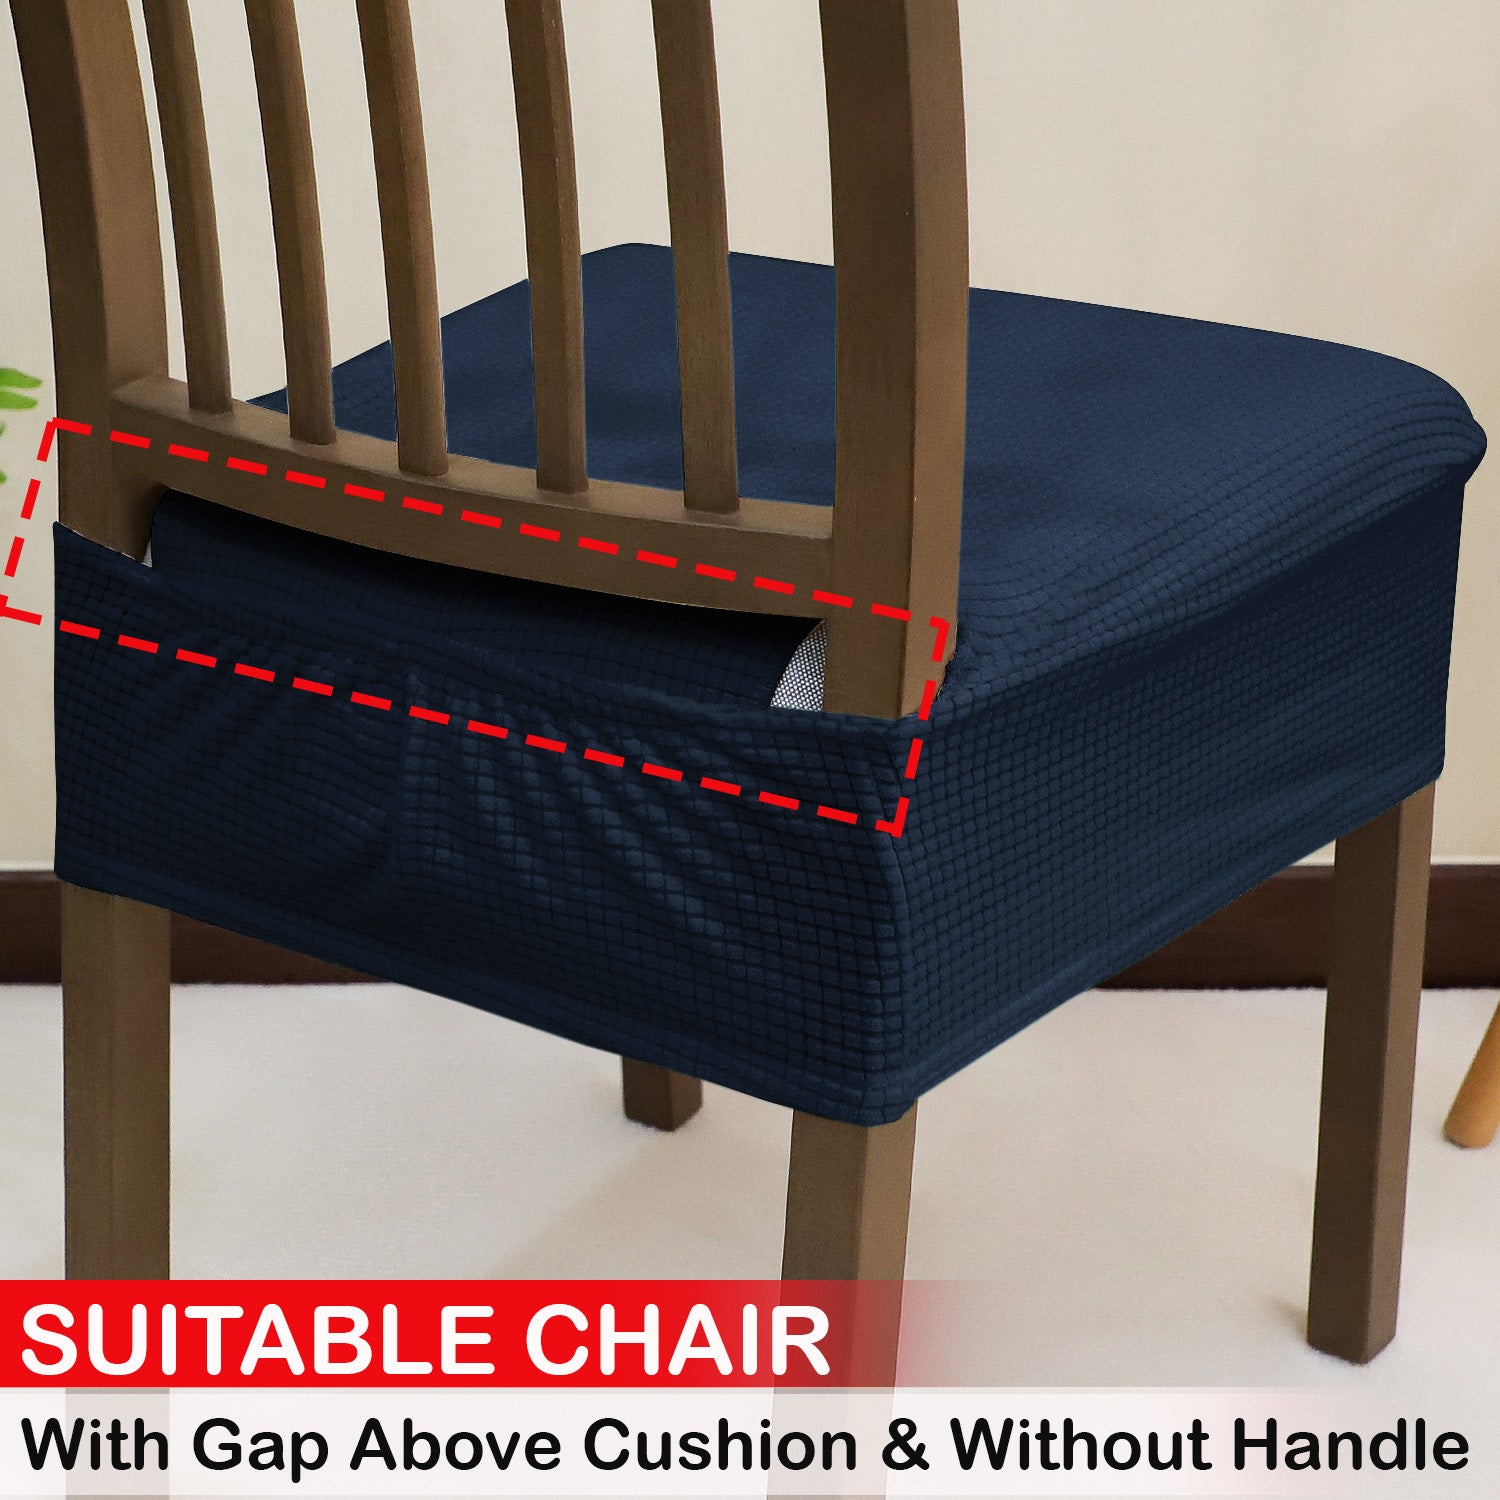 100% Waterproof Jacquard Dining Chair Seat Cushion Cover, Navy Blue